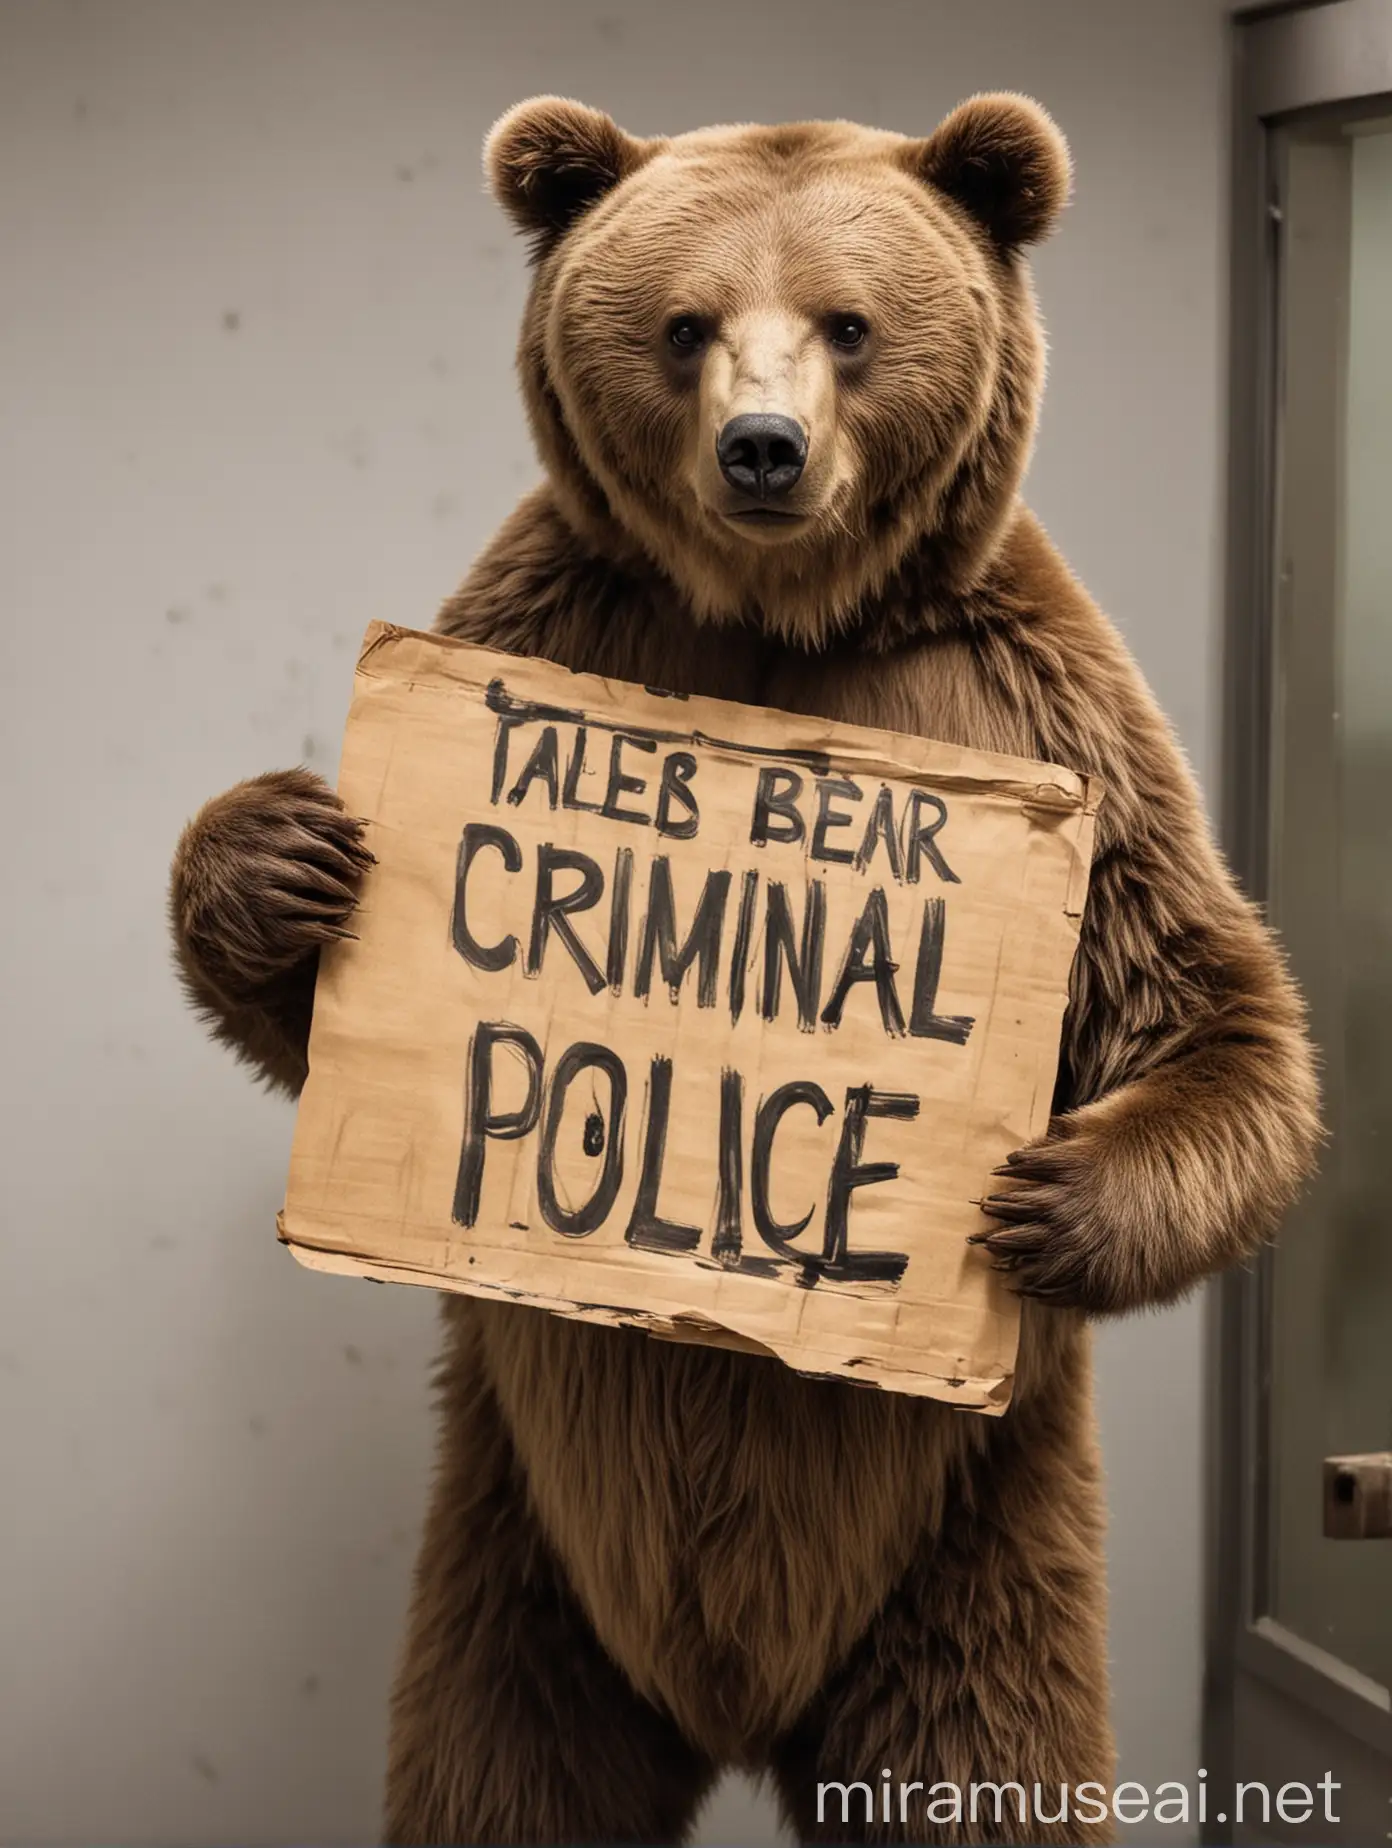 The bear is a criminal with a sign in his hands at the police station